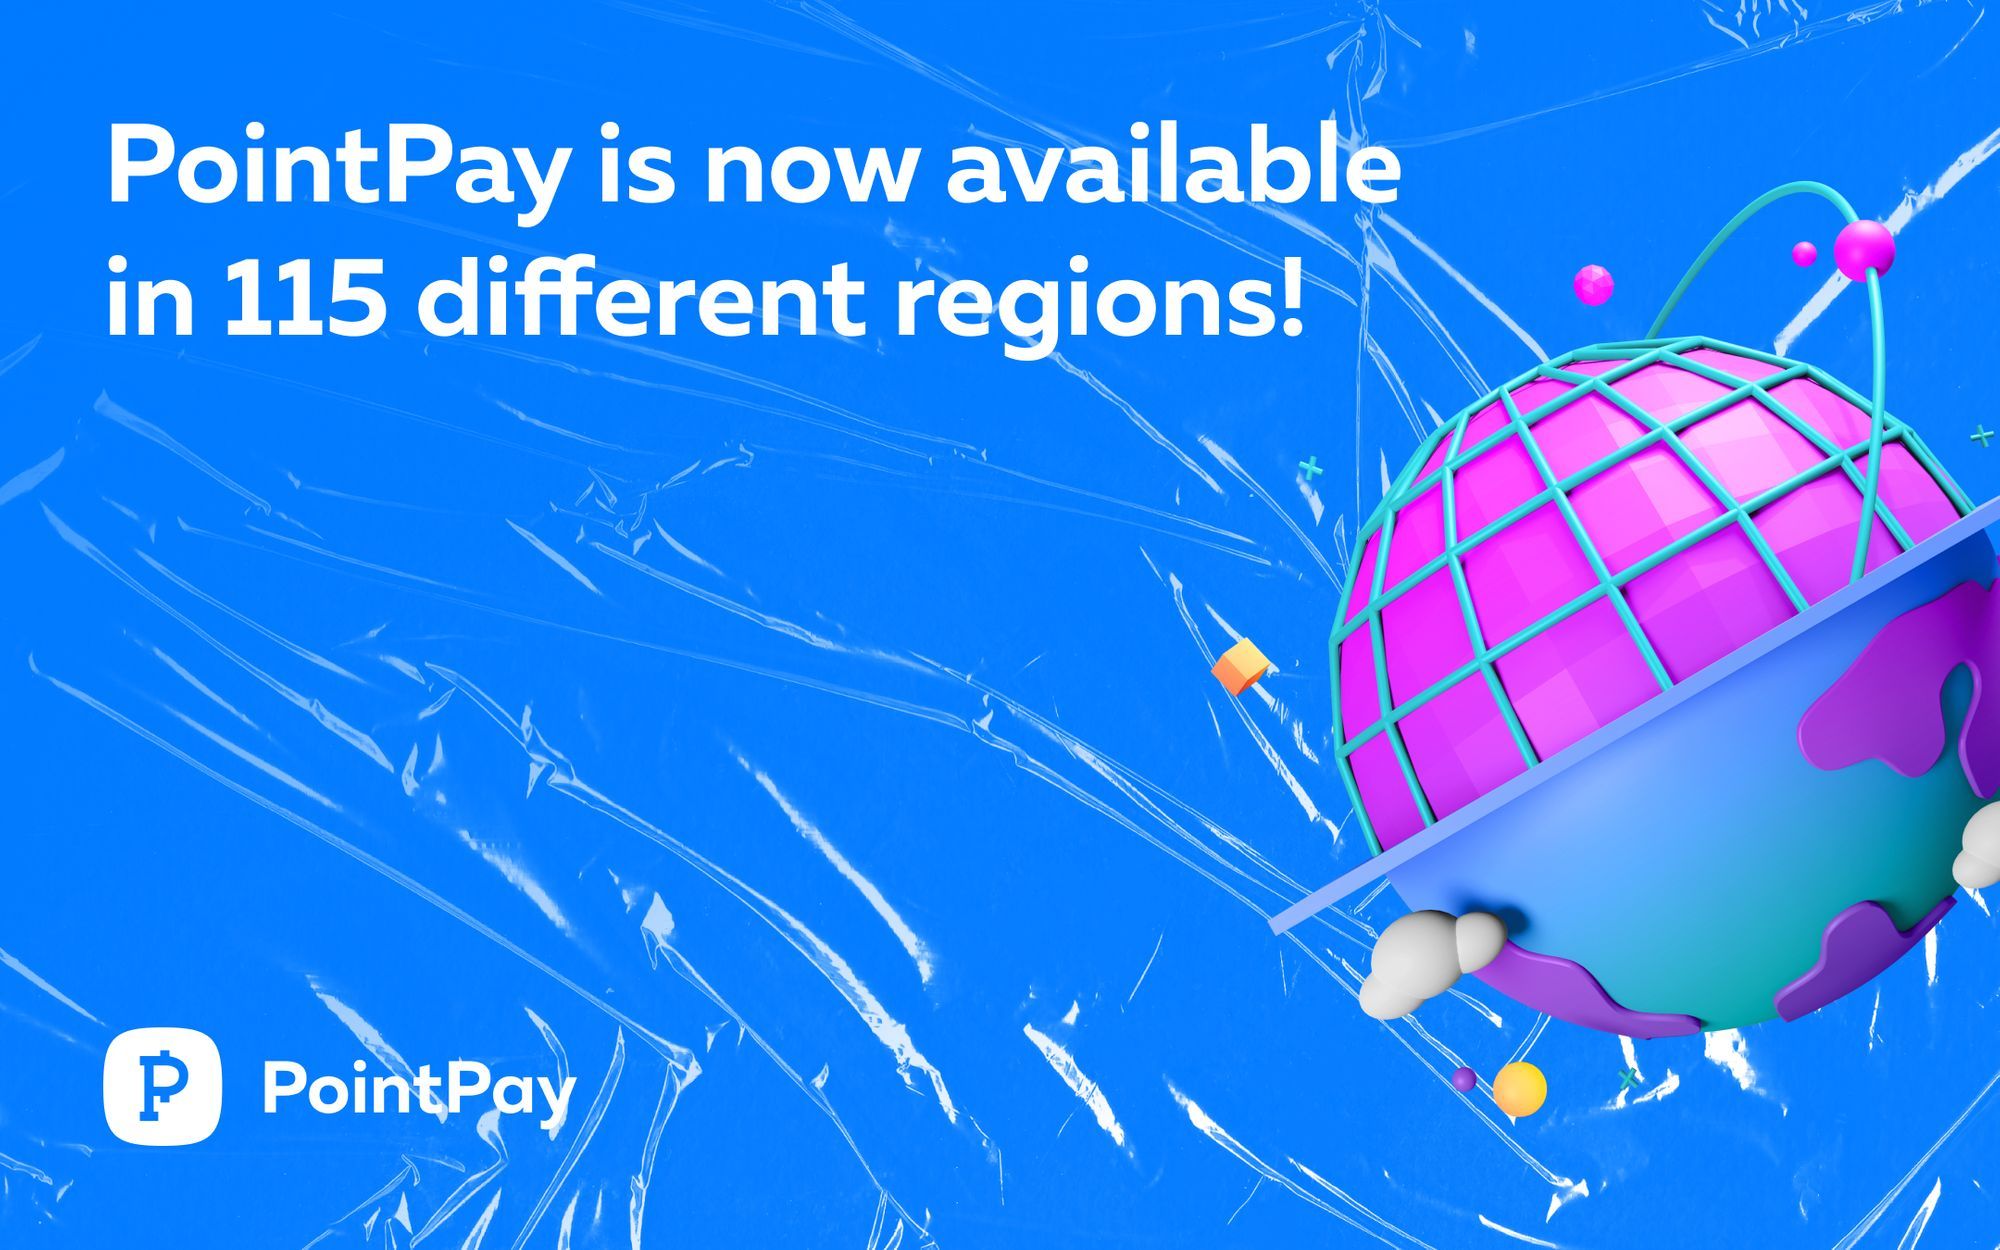 PointPay expands aviability even further!